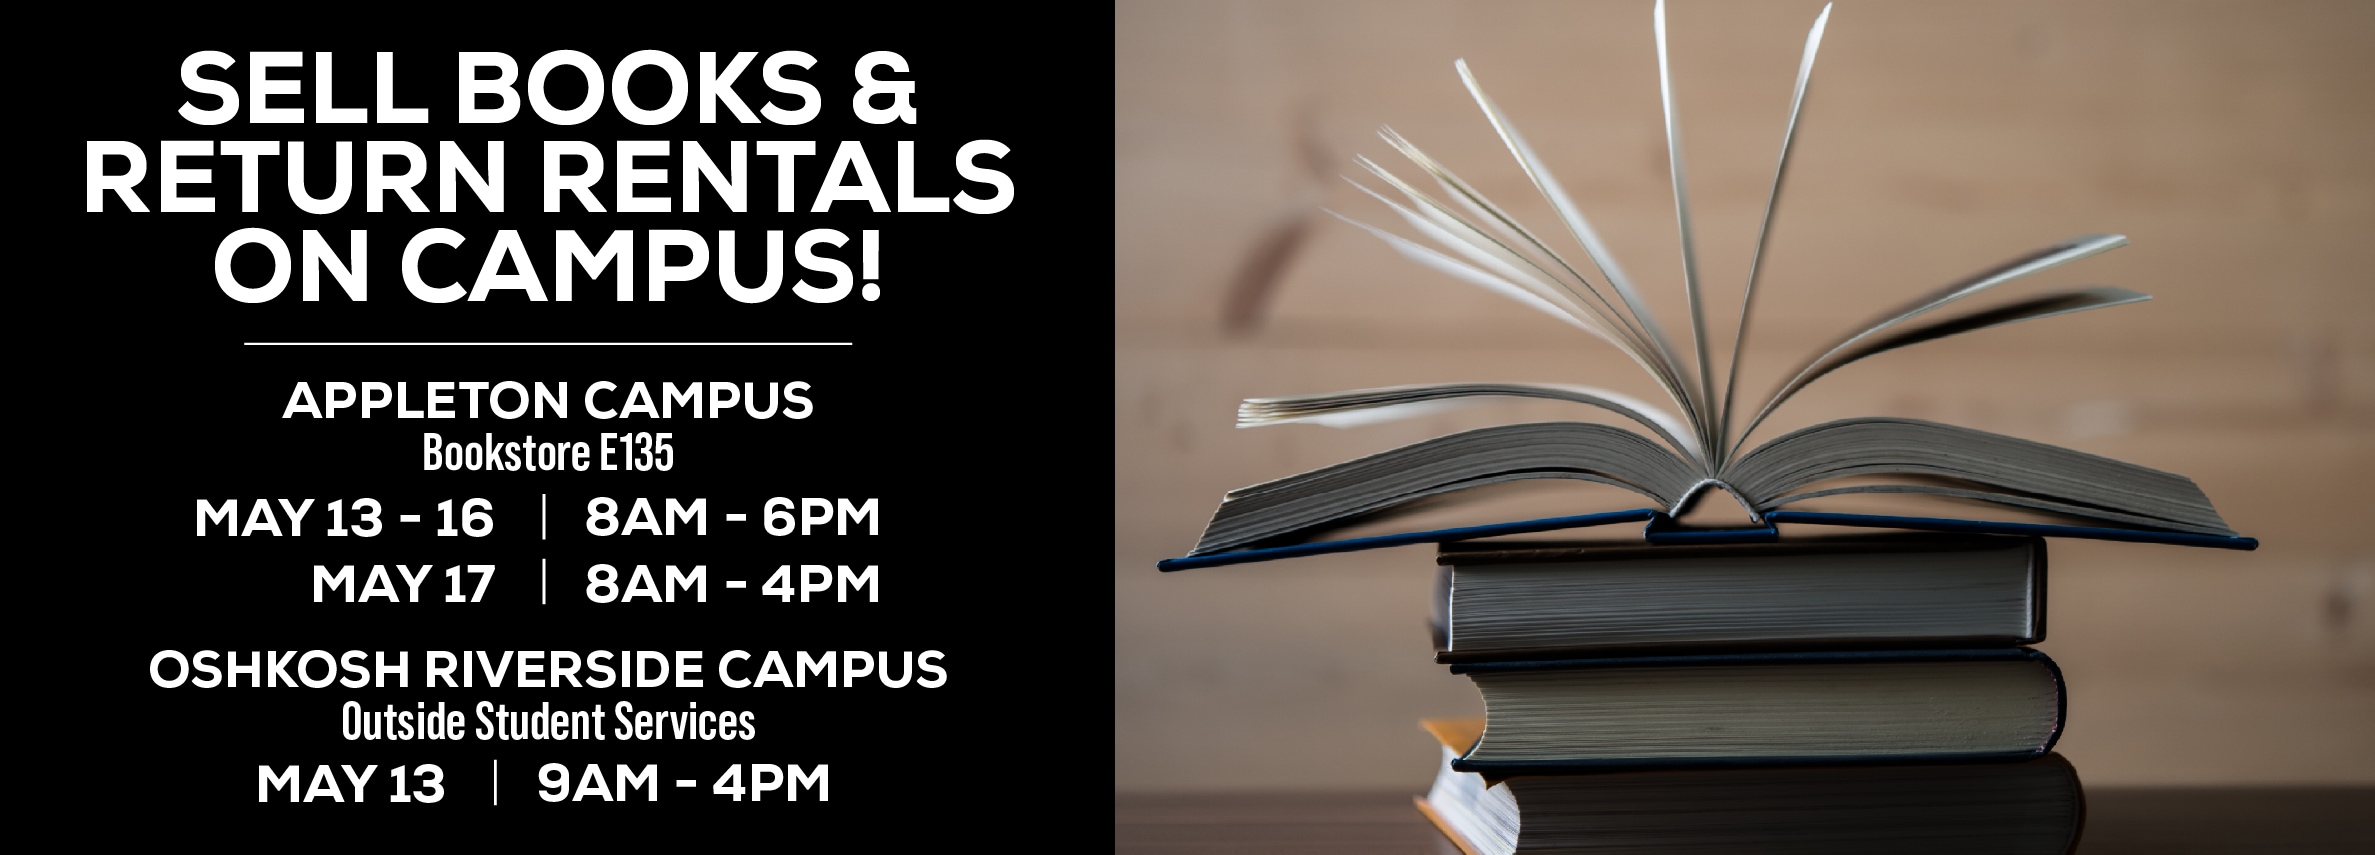 Sell Books & Return Rentals On Campus! Appleton: May 13 - 16, 8am-6pm, May 17, 8am-4pm; Oshkosh: May 13, 9am-4pm